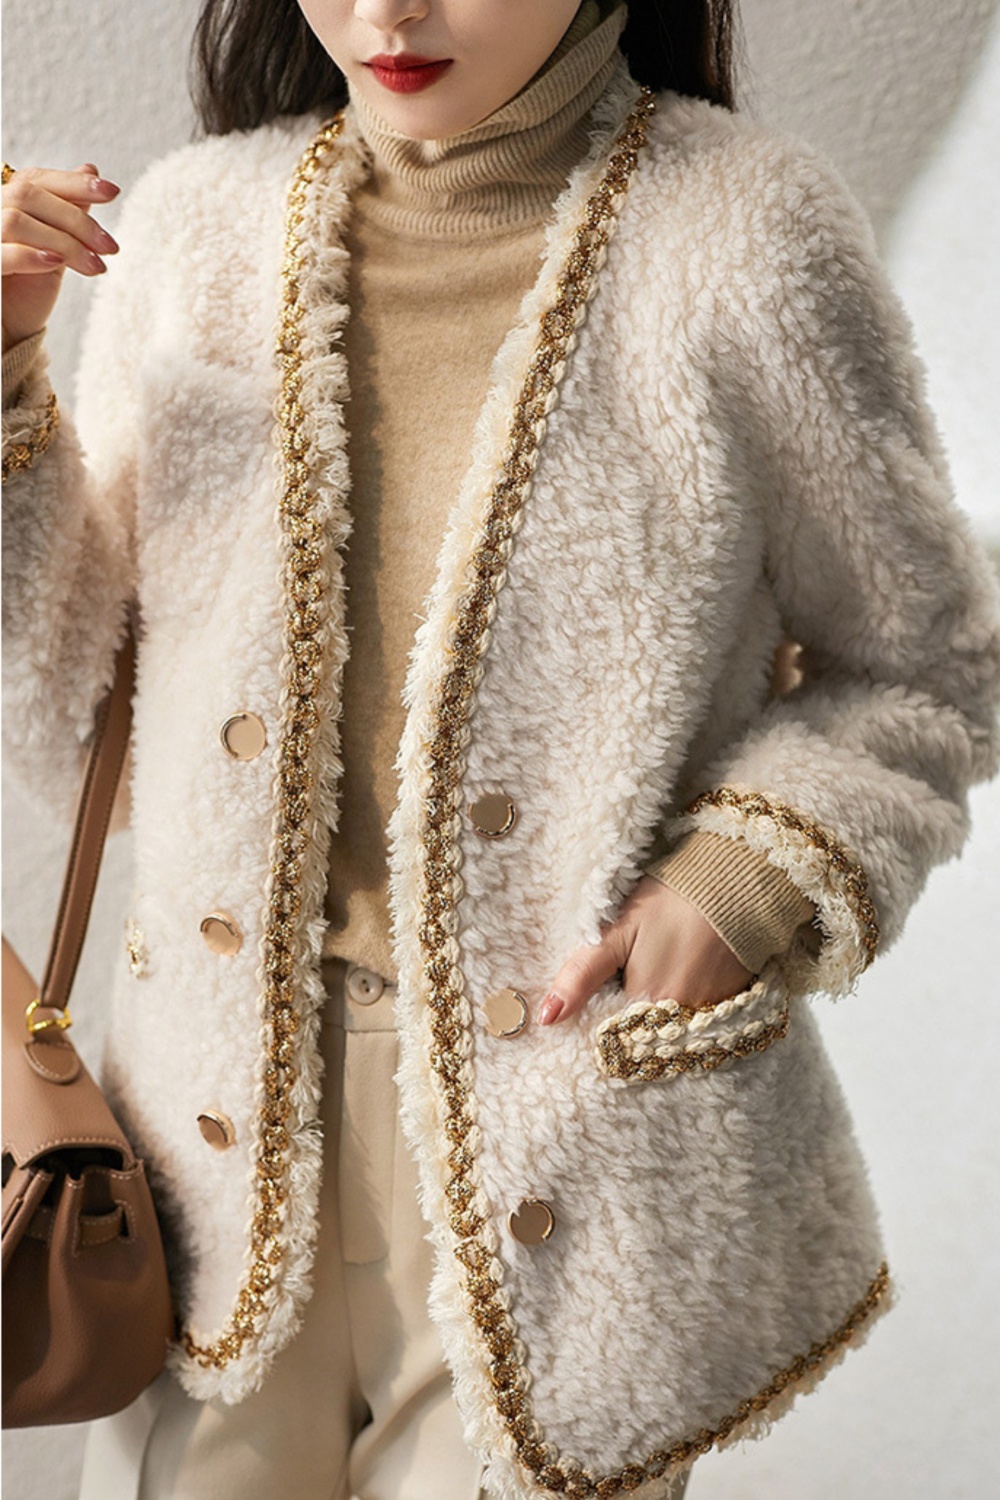 Lambs wool thick autumn France style chanelstyle coat